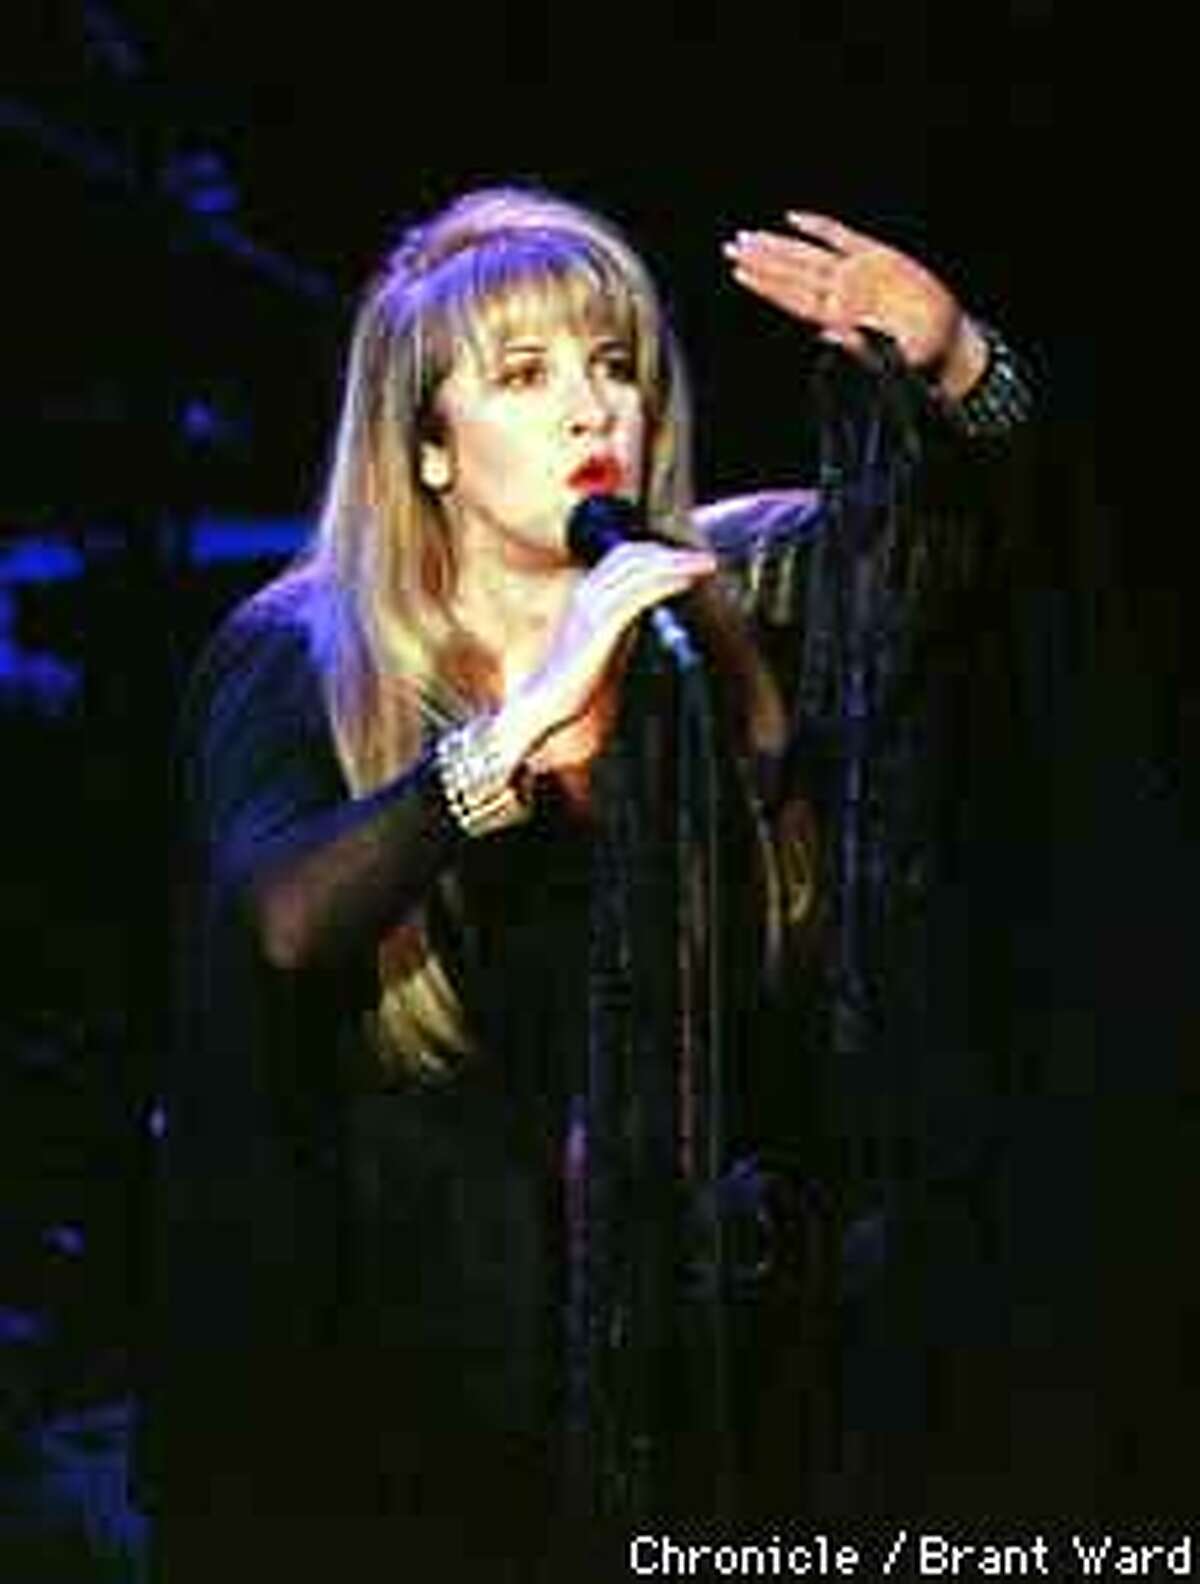 Stevie Nicks opened the concert with a song Tuesday night. By Brant Ward/Chronicle